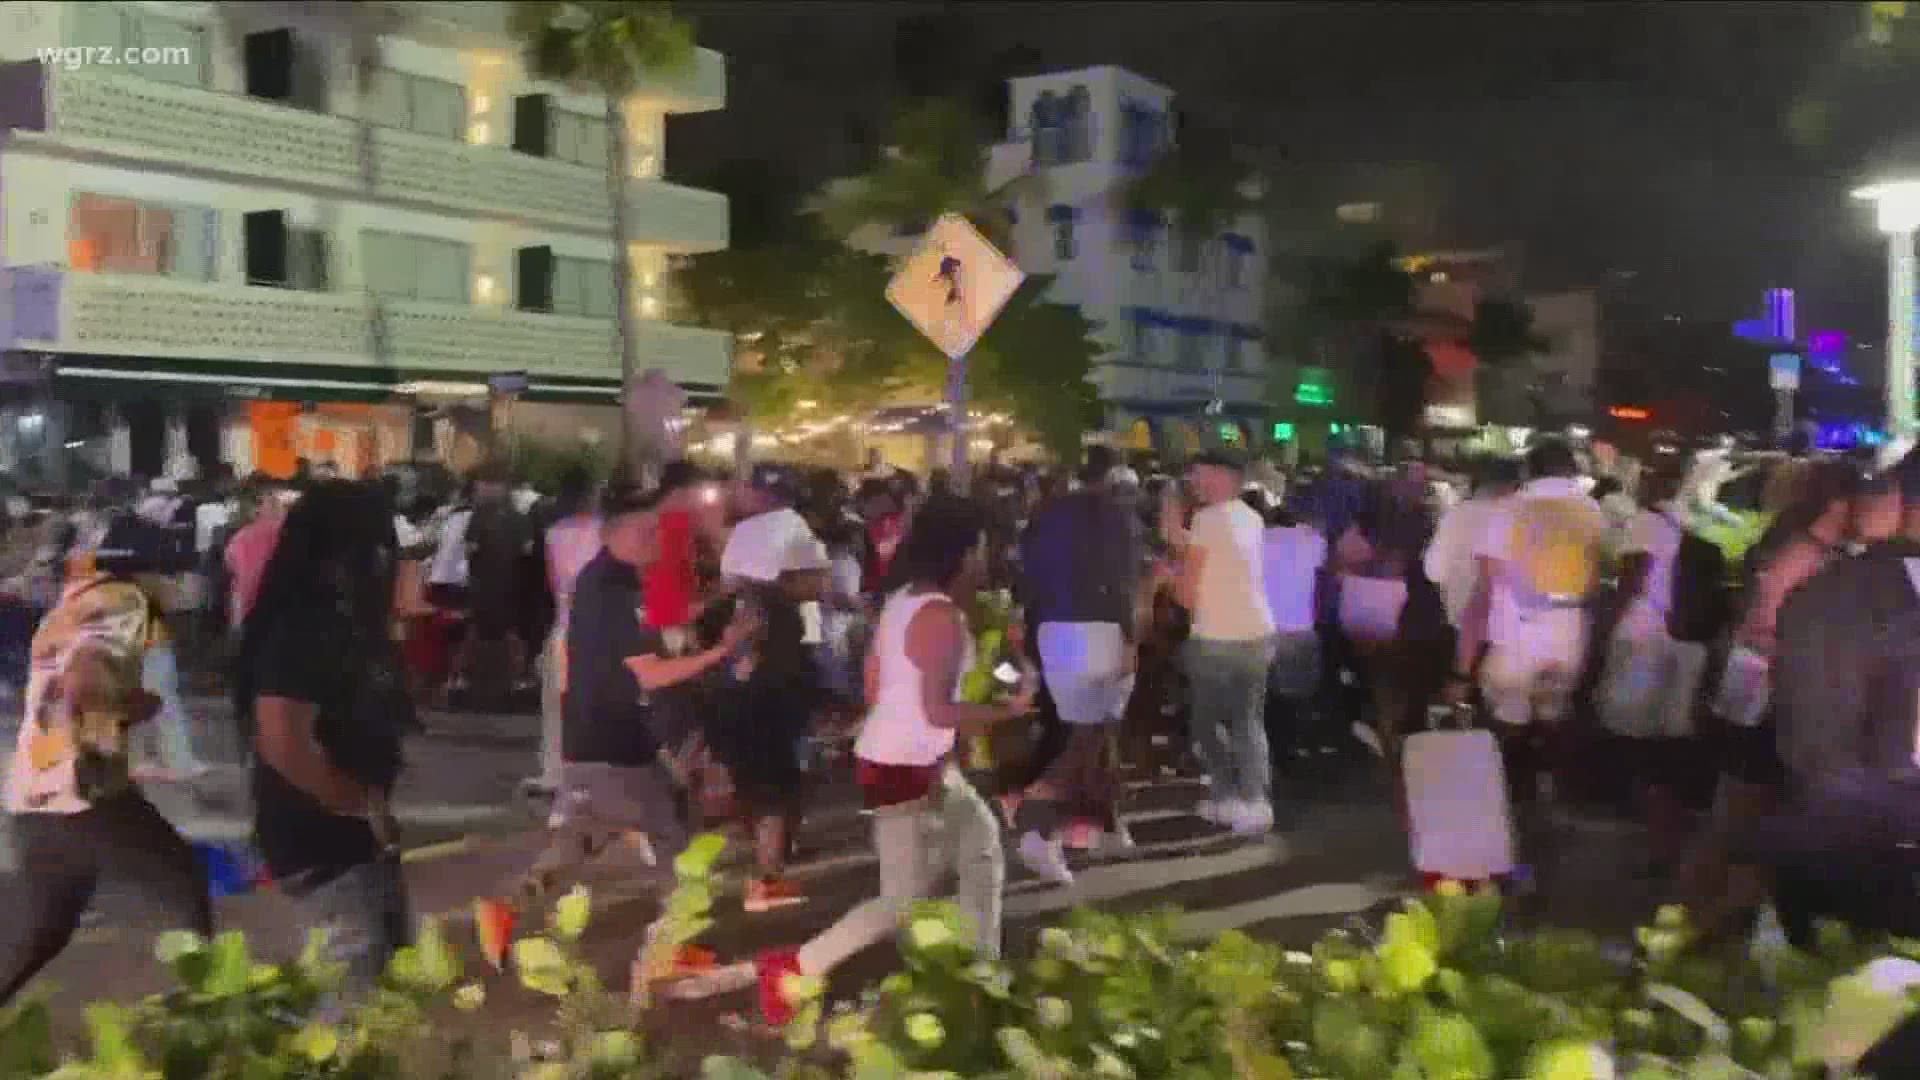 Miami Beach began enforcing a curfew Saturday night after crowds of spring breakers descended onto the city.